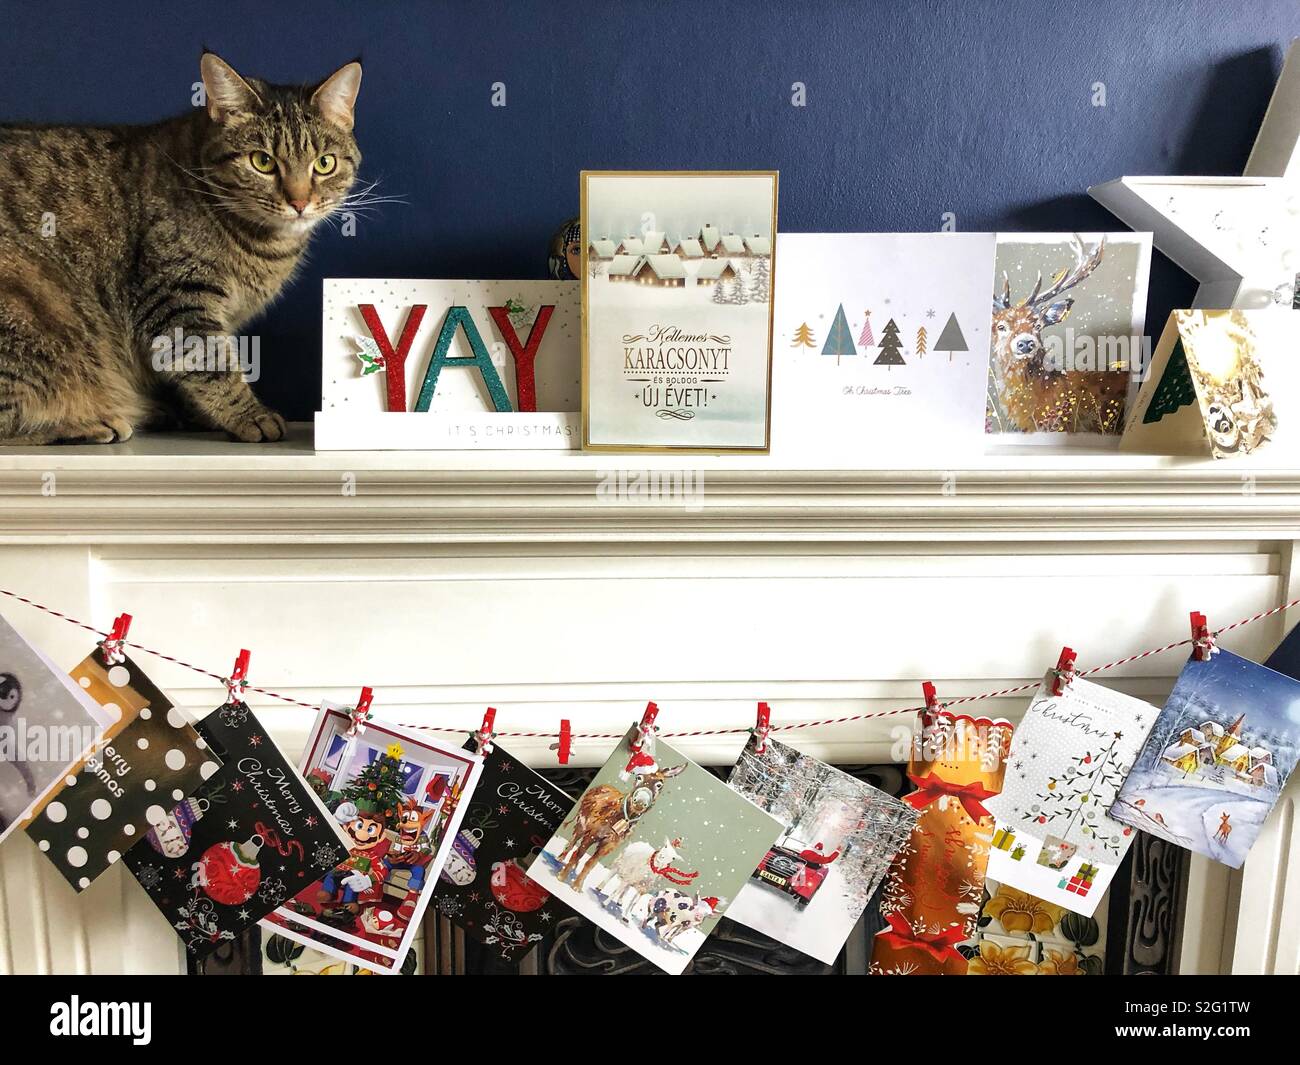 Bah humbug! Grumpy cat sitting with Christmas cards on a mantelpiece Stock Photo